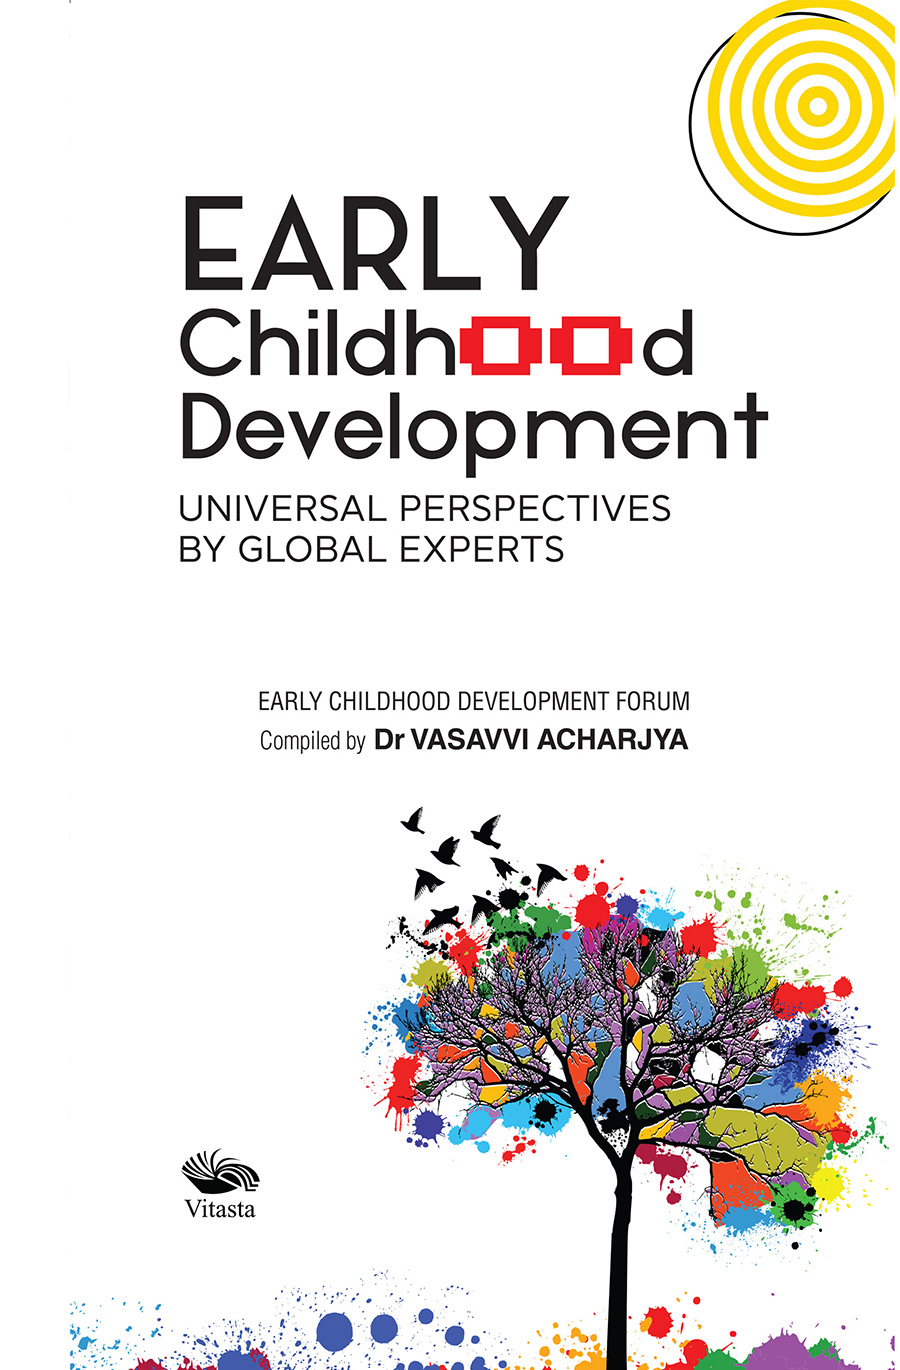 Early Childhood Development Universal Perspectives by Global Experts